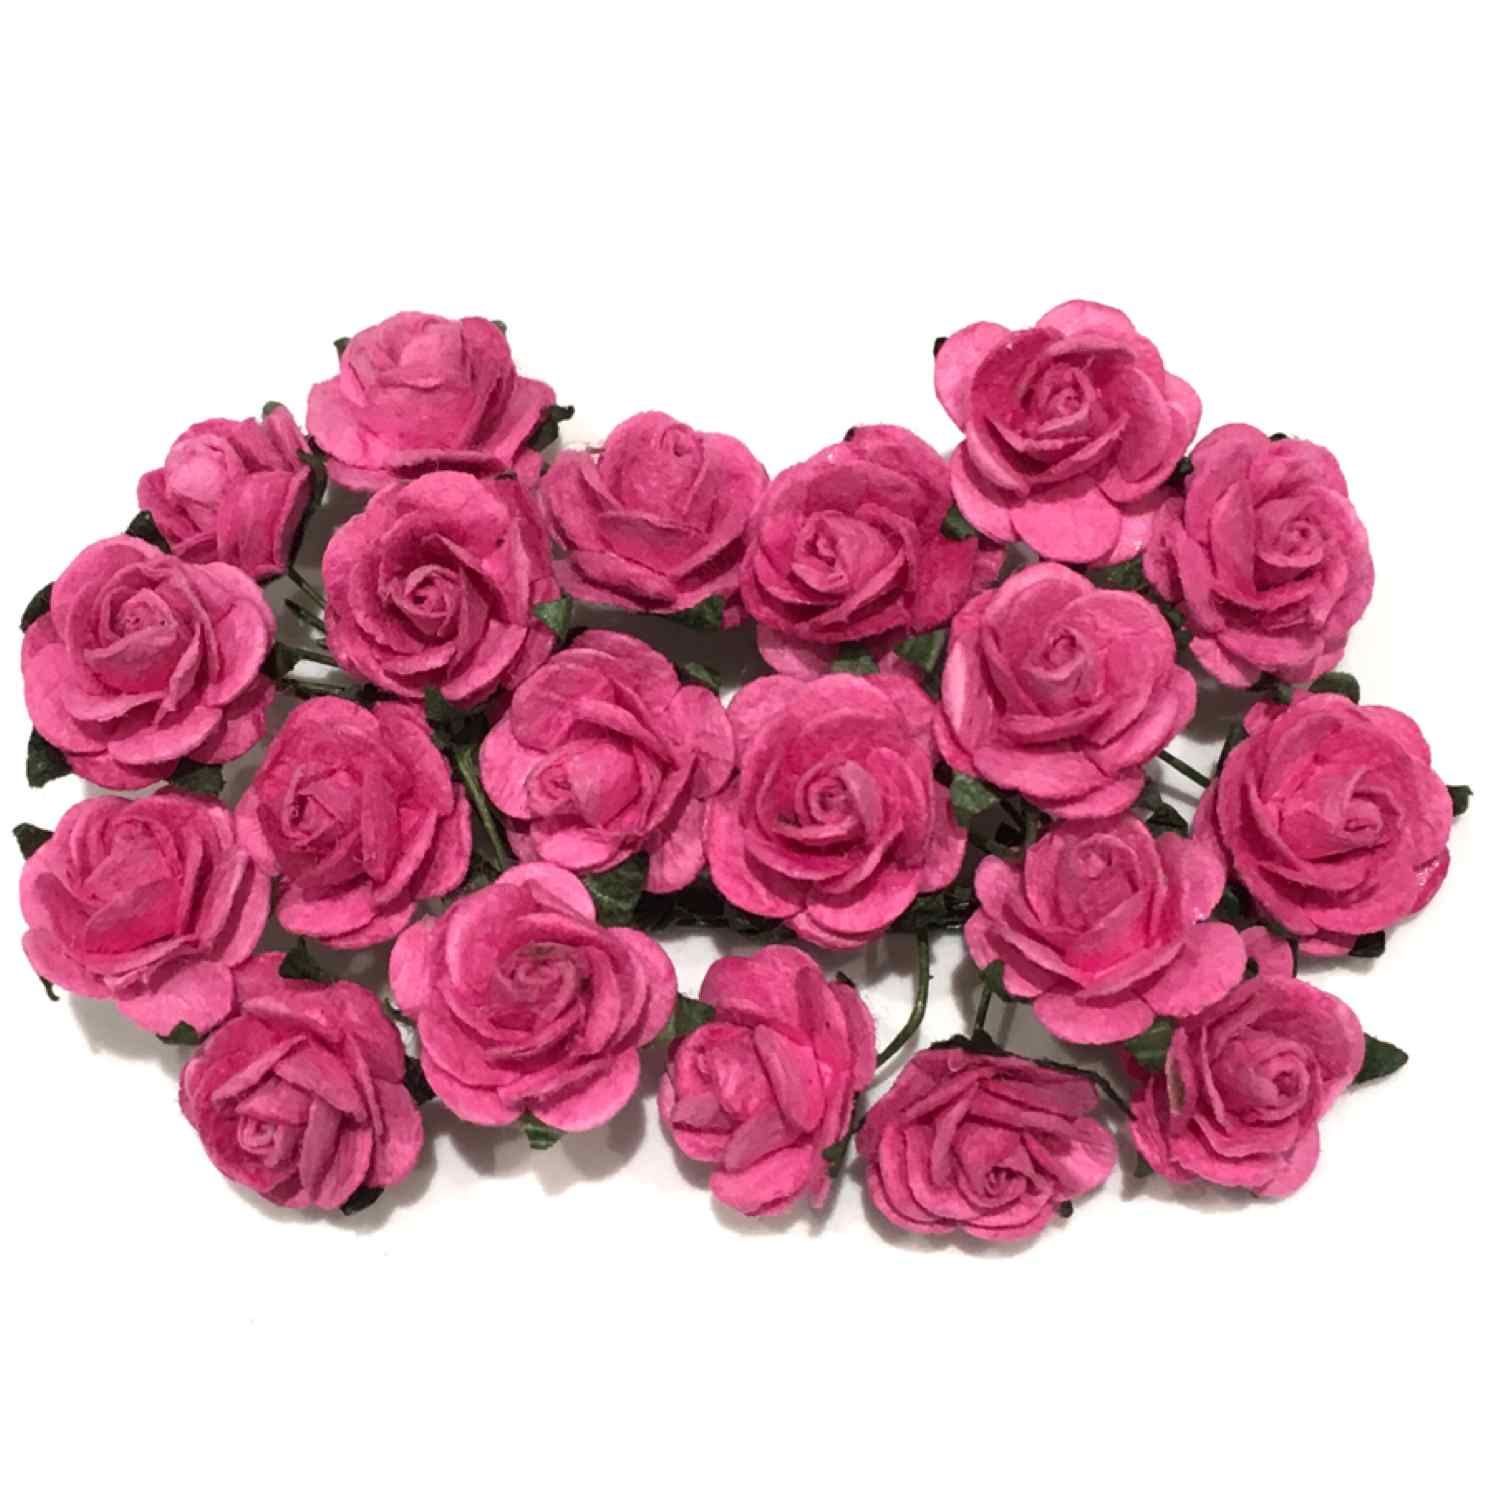 Deep Pink Open Mulberry Paper Roses Or051